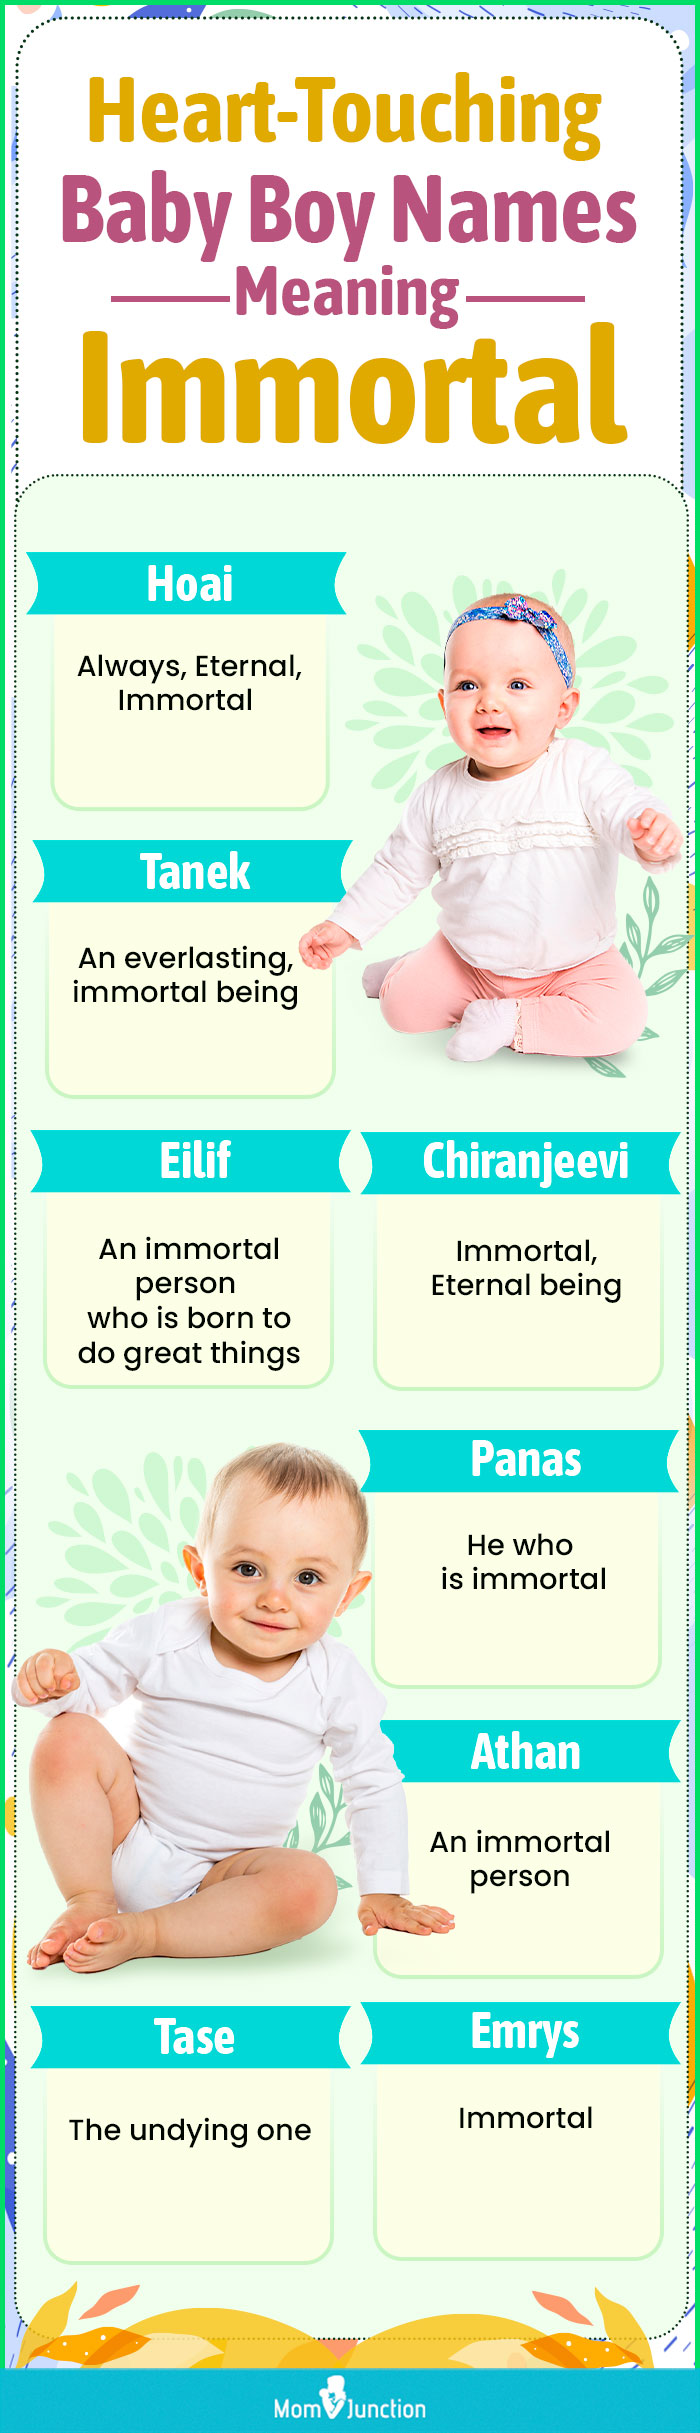 heart touching baby boy names meaning immortal (infographic)